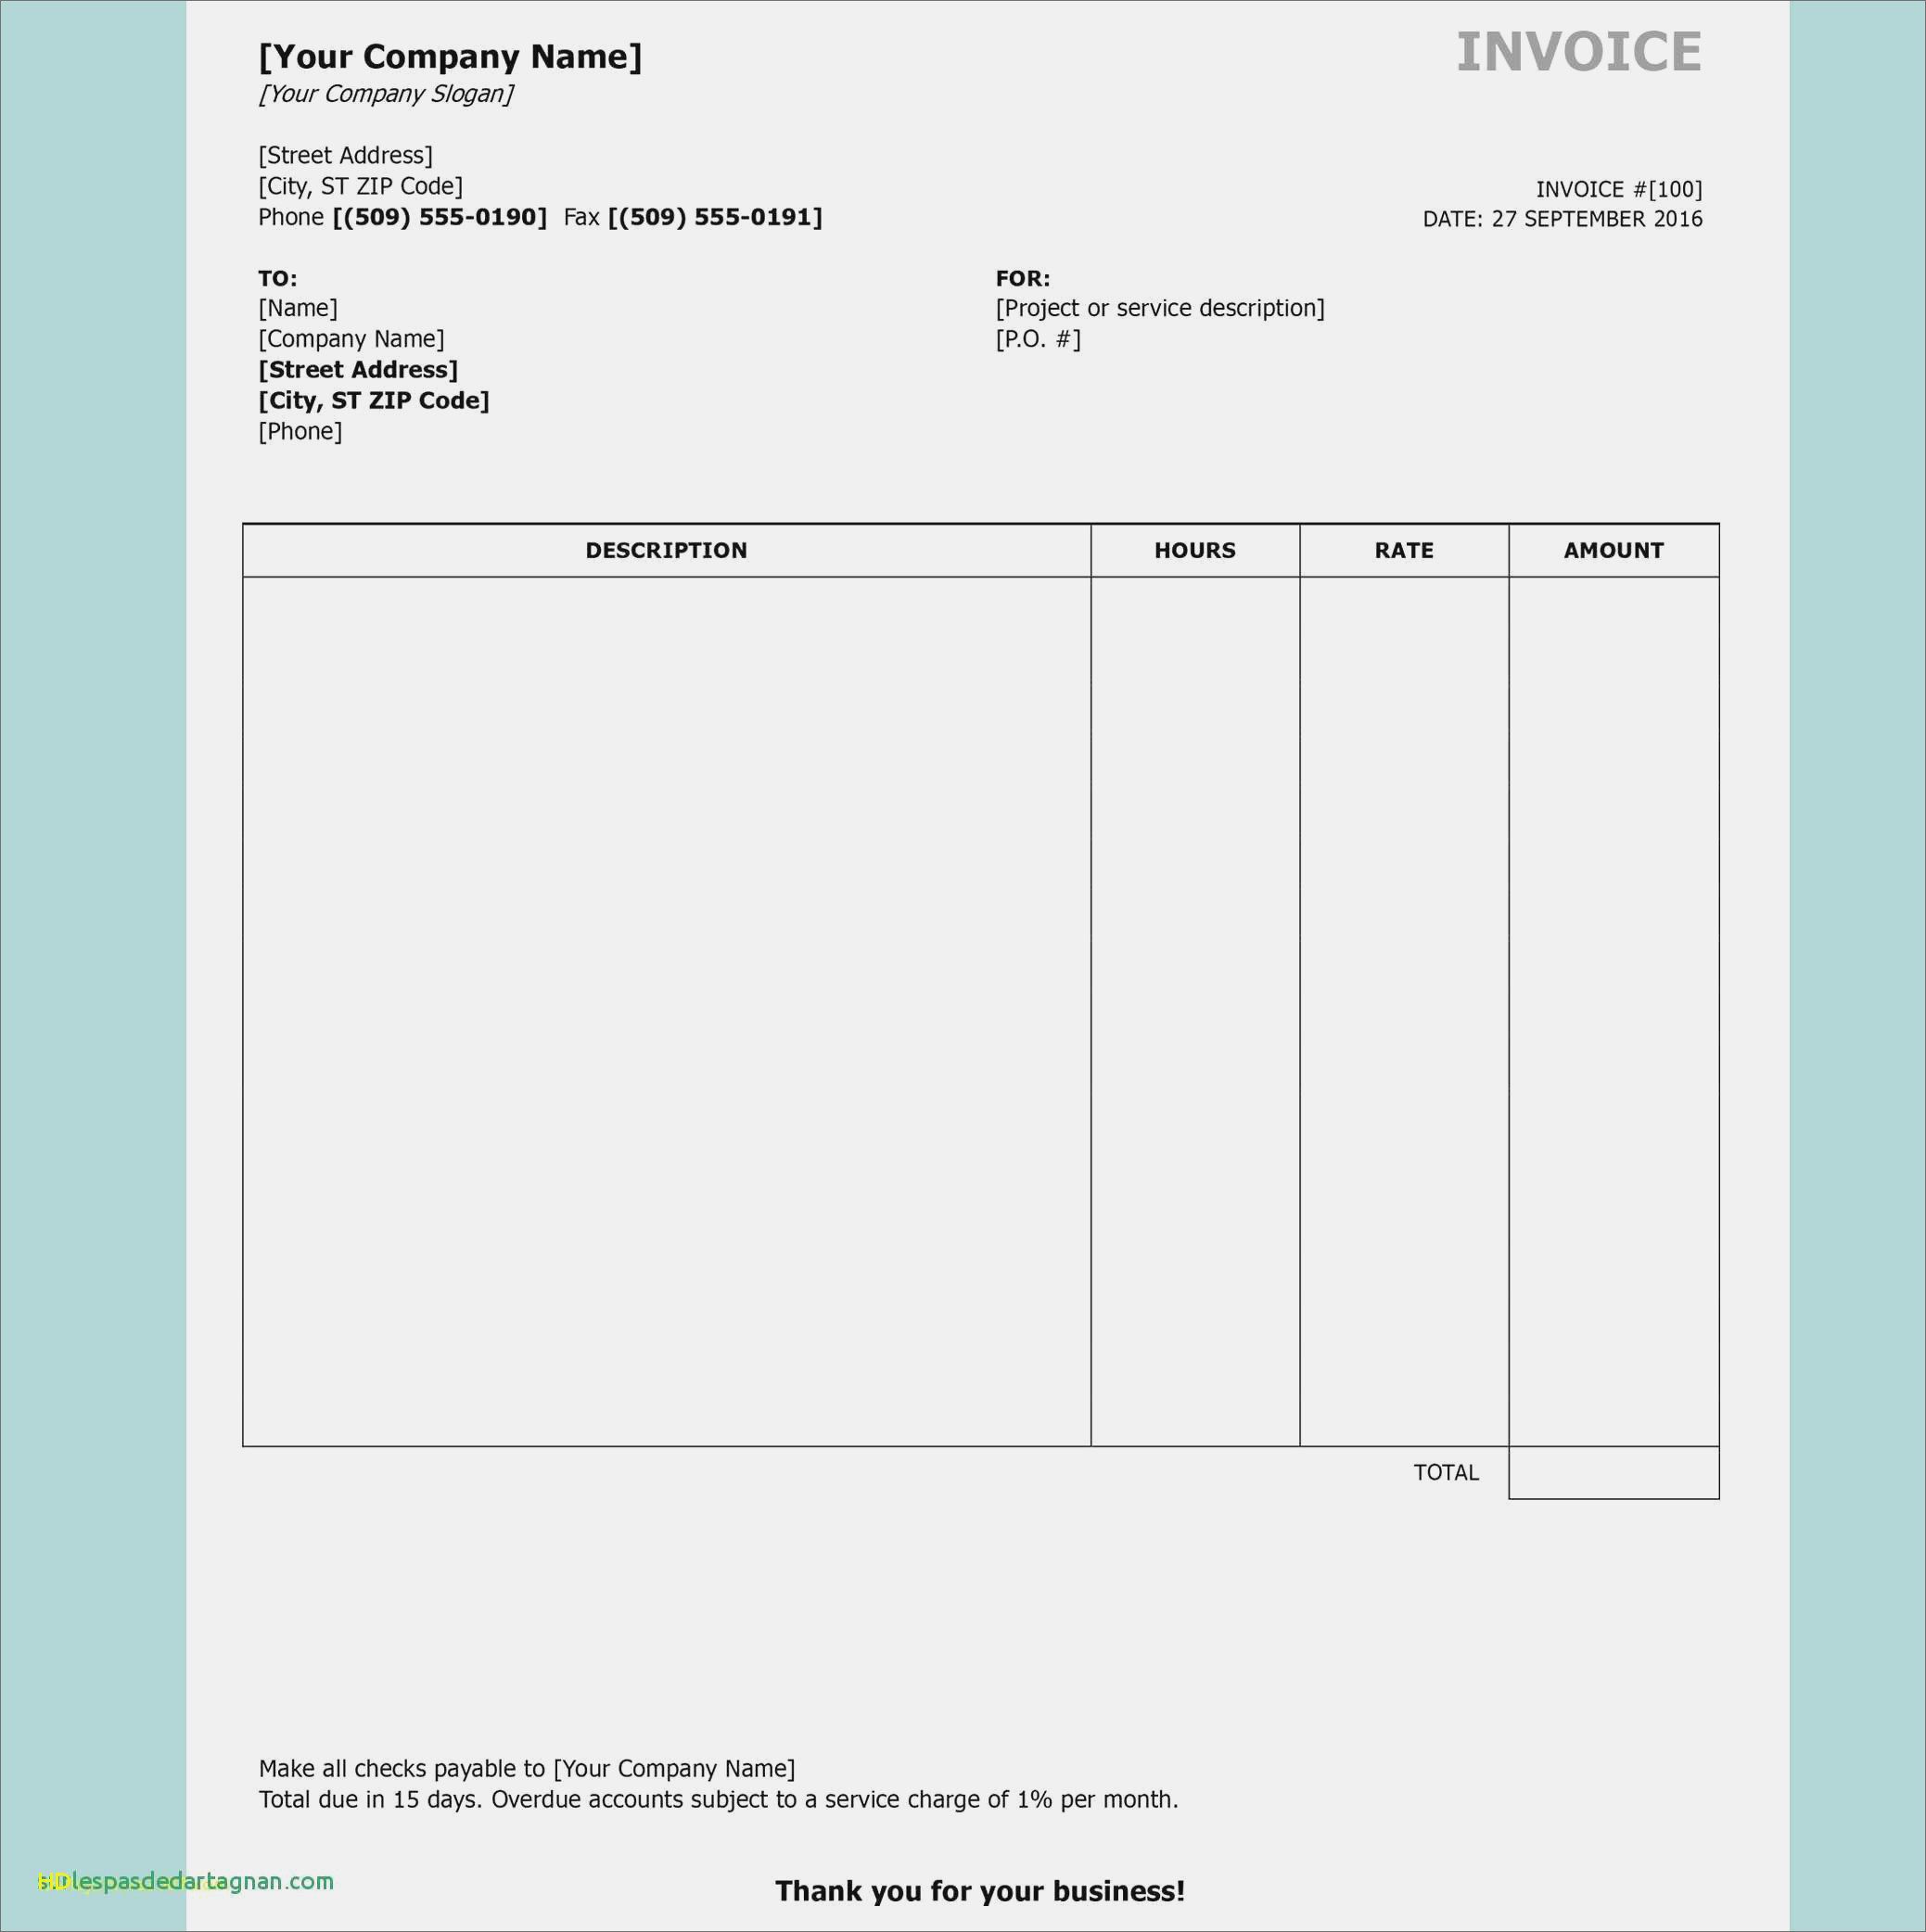 Adobe Spreadsheet With Adobe Illustrator Invoice Template  Spreadsheet Collections